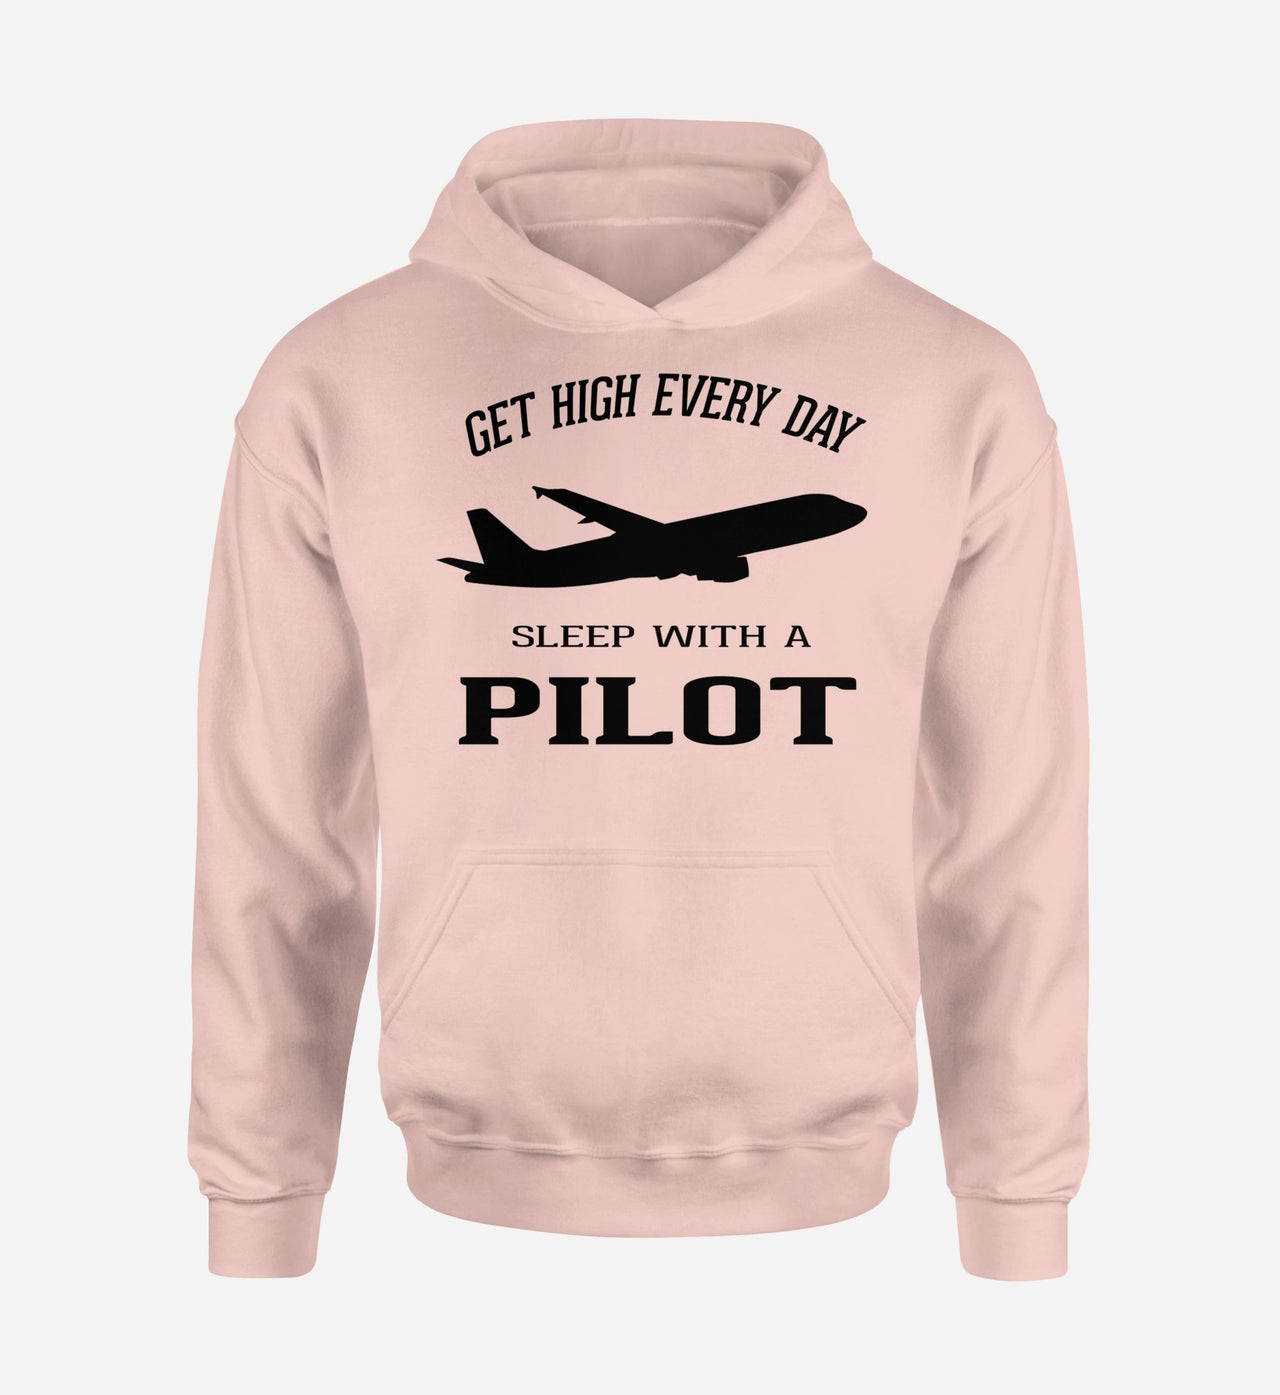 Get High Every Day Sleep With A Pilot Designed Hoodies